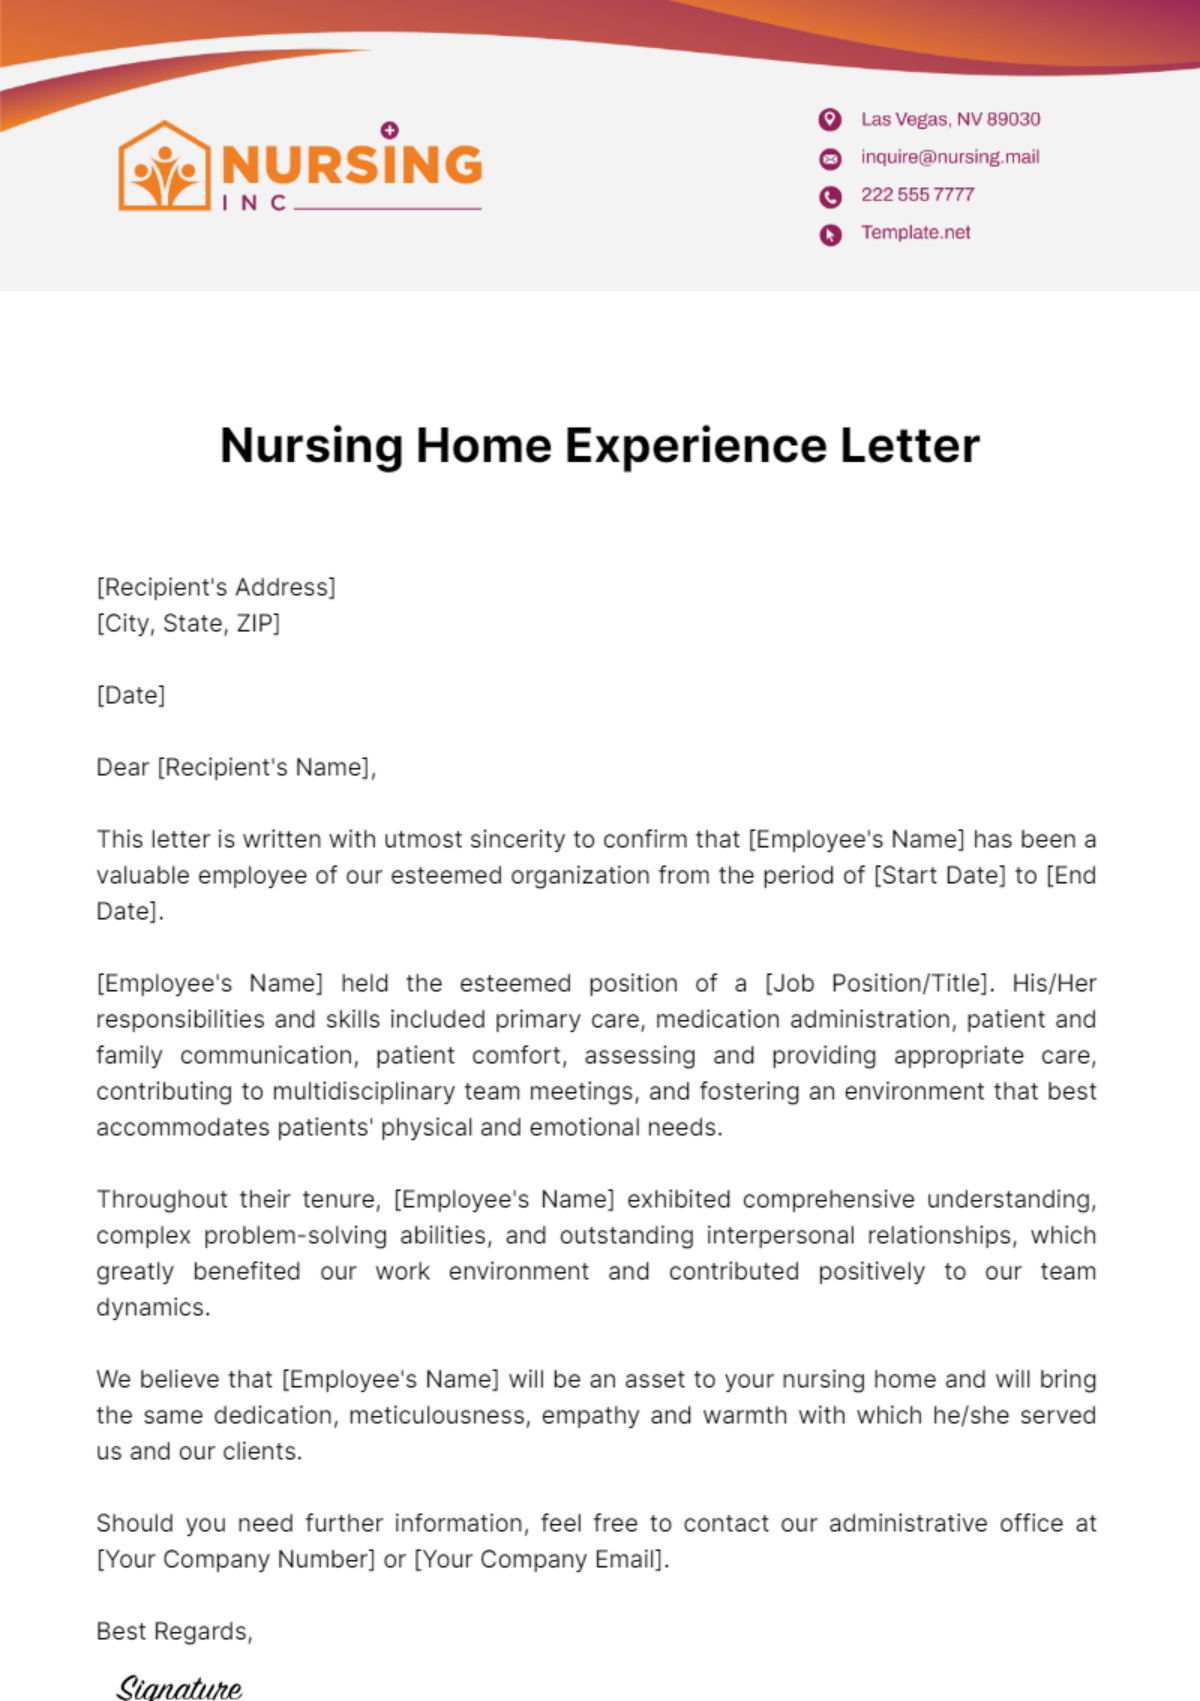 Nursing Home Experience Letter Template